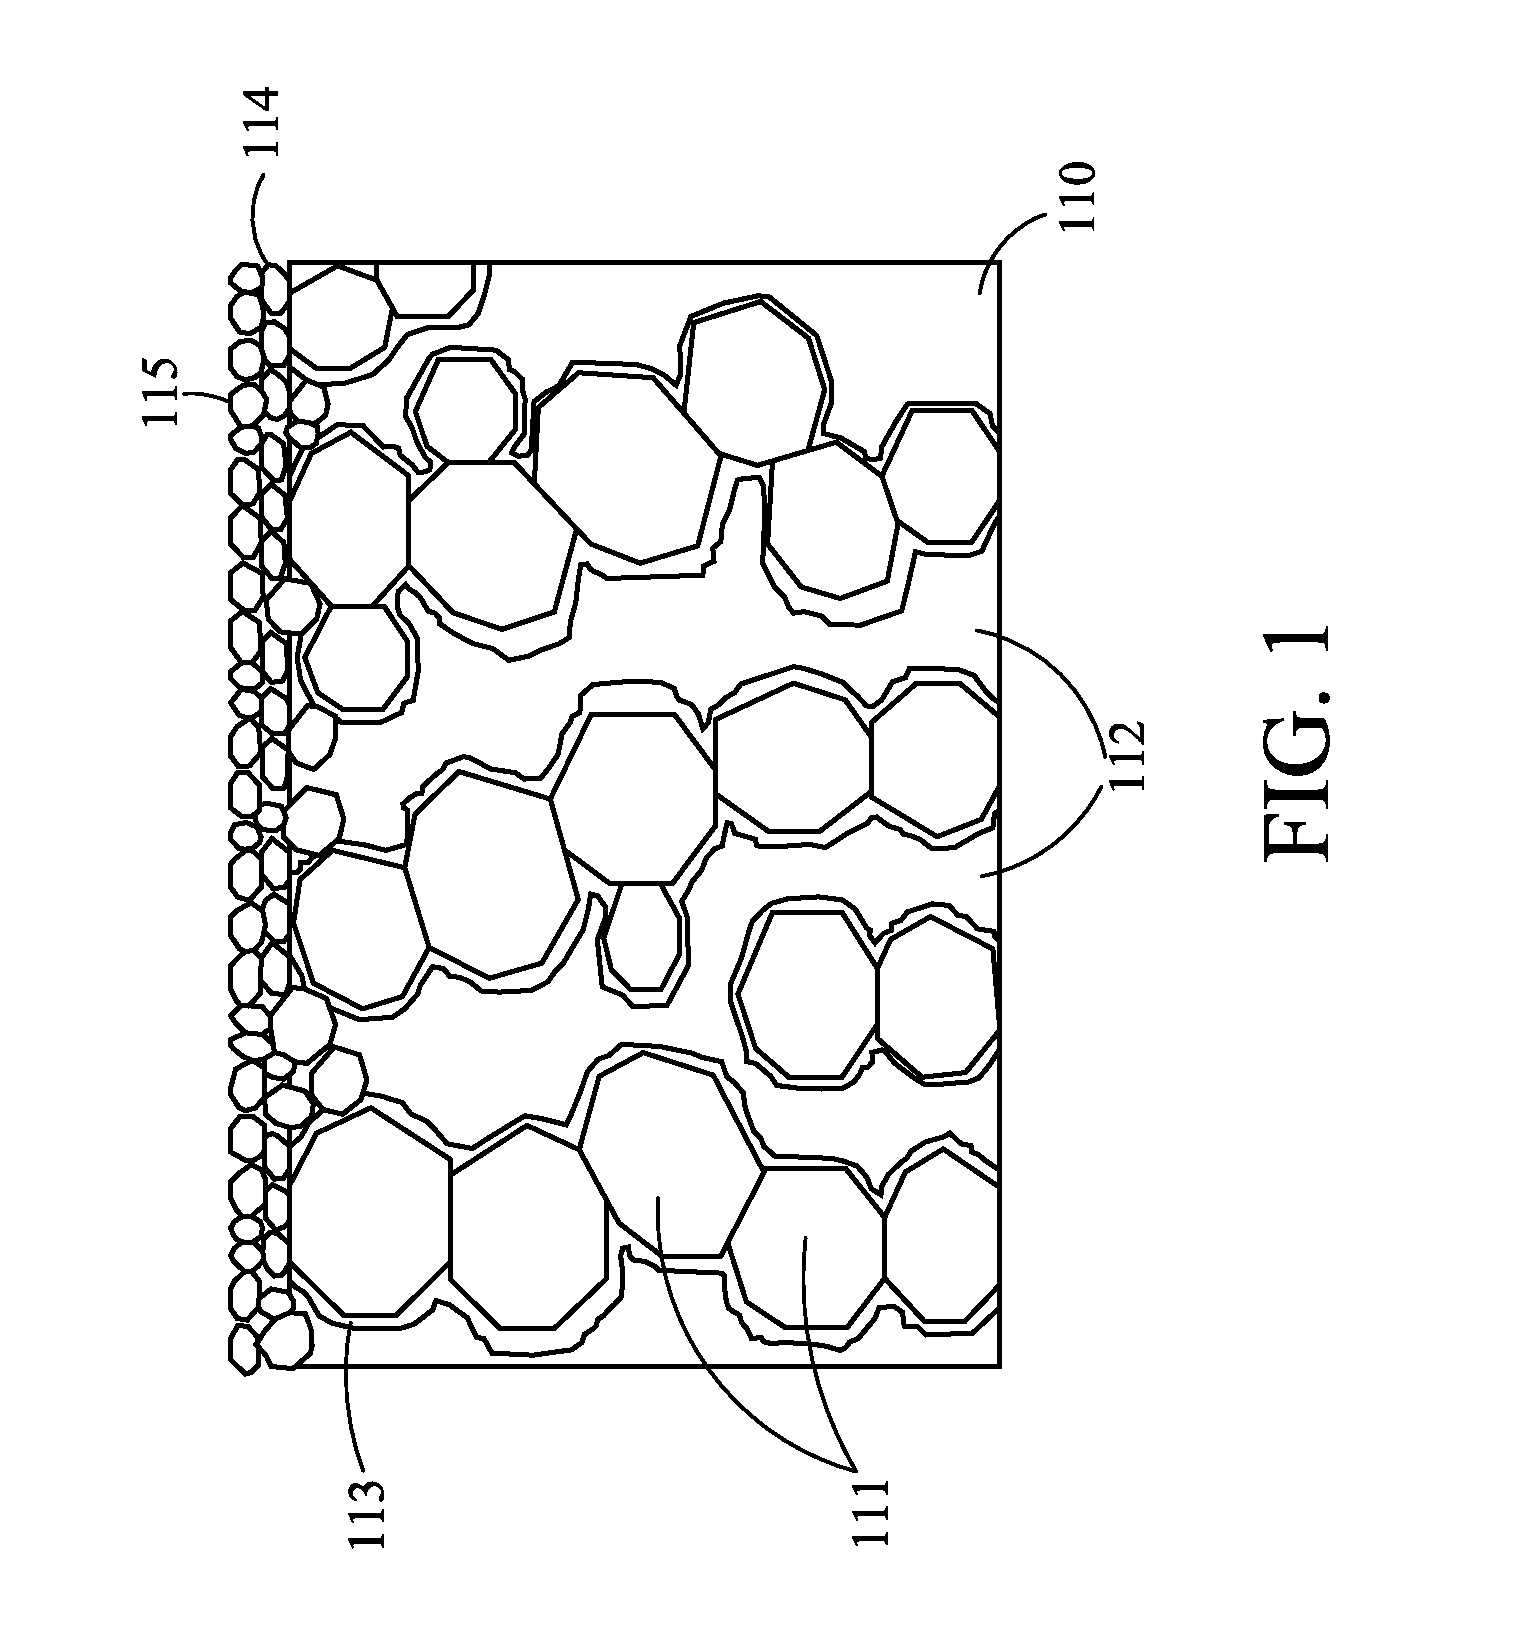 Porous metal substrate structure for a solid oxide fuel cell